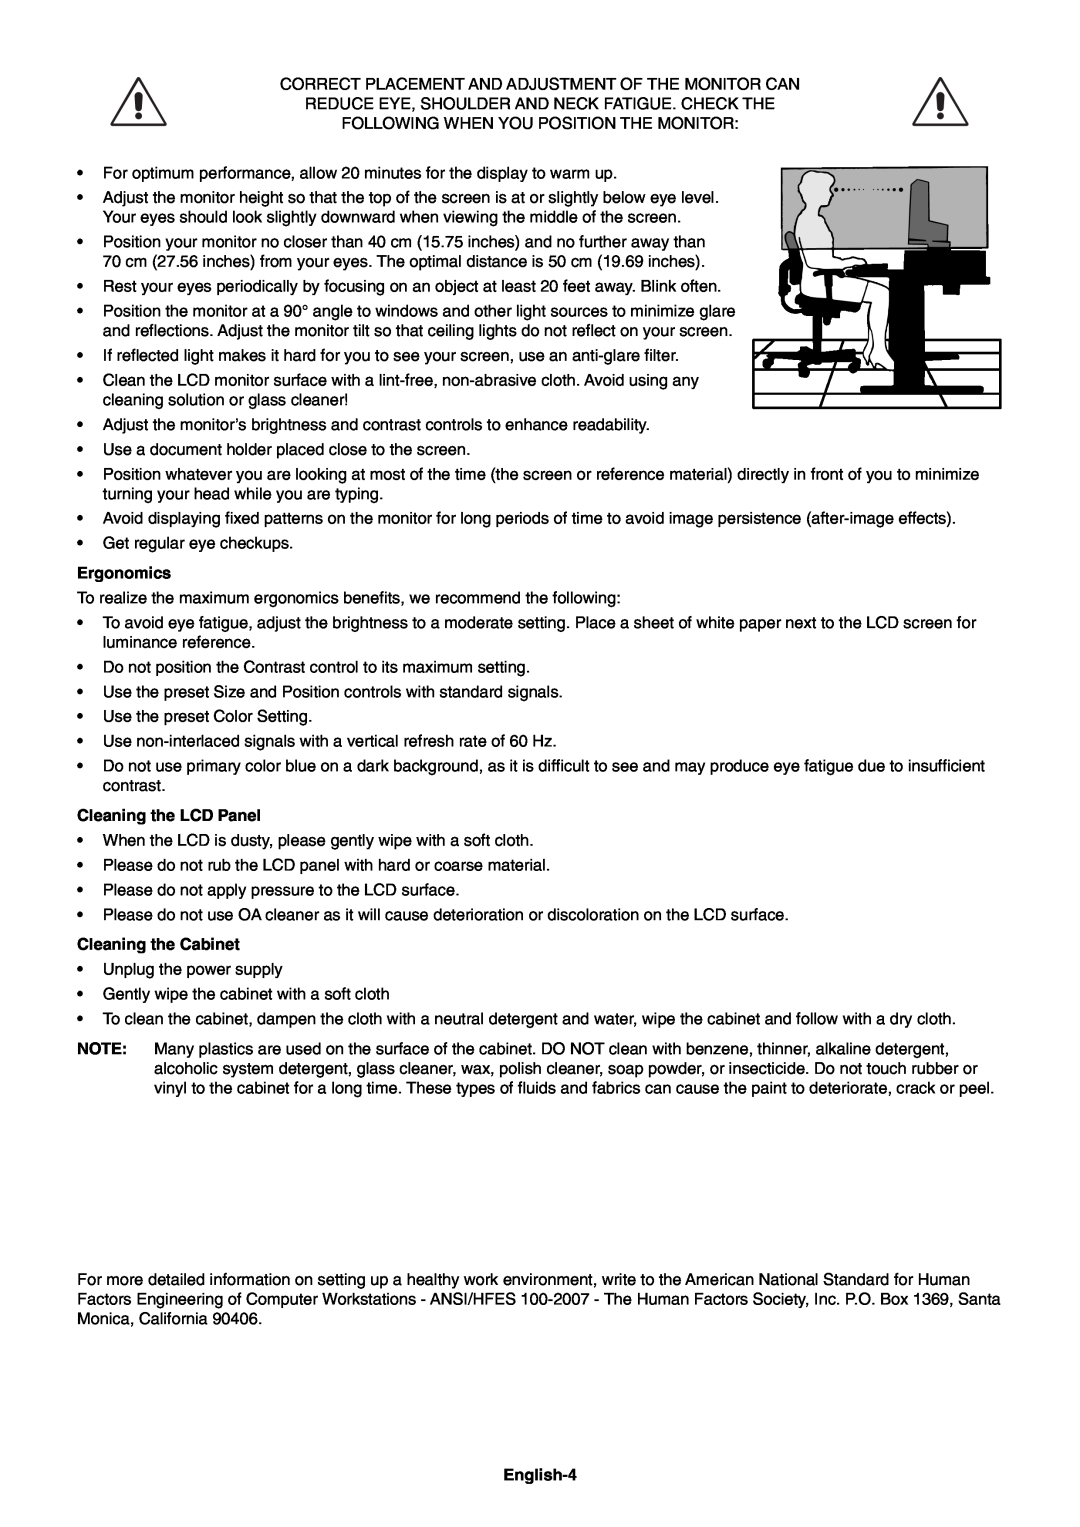 NEC EA244WMI-BK user manual Ergonomics, Cleaning the LCD Panel, Cleaning the Cabinet, English-4 